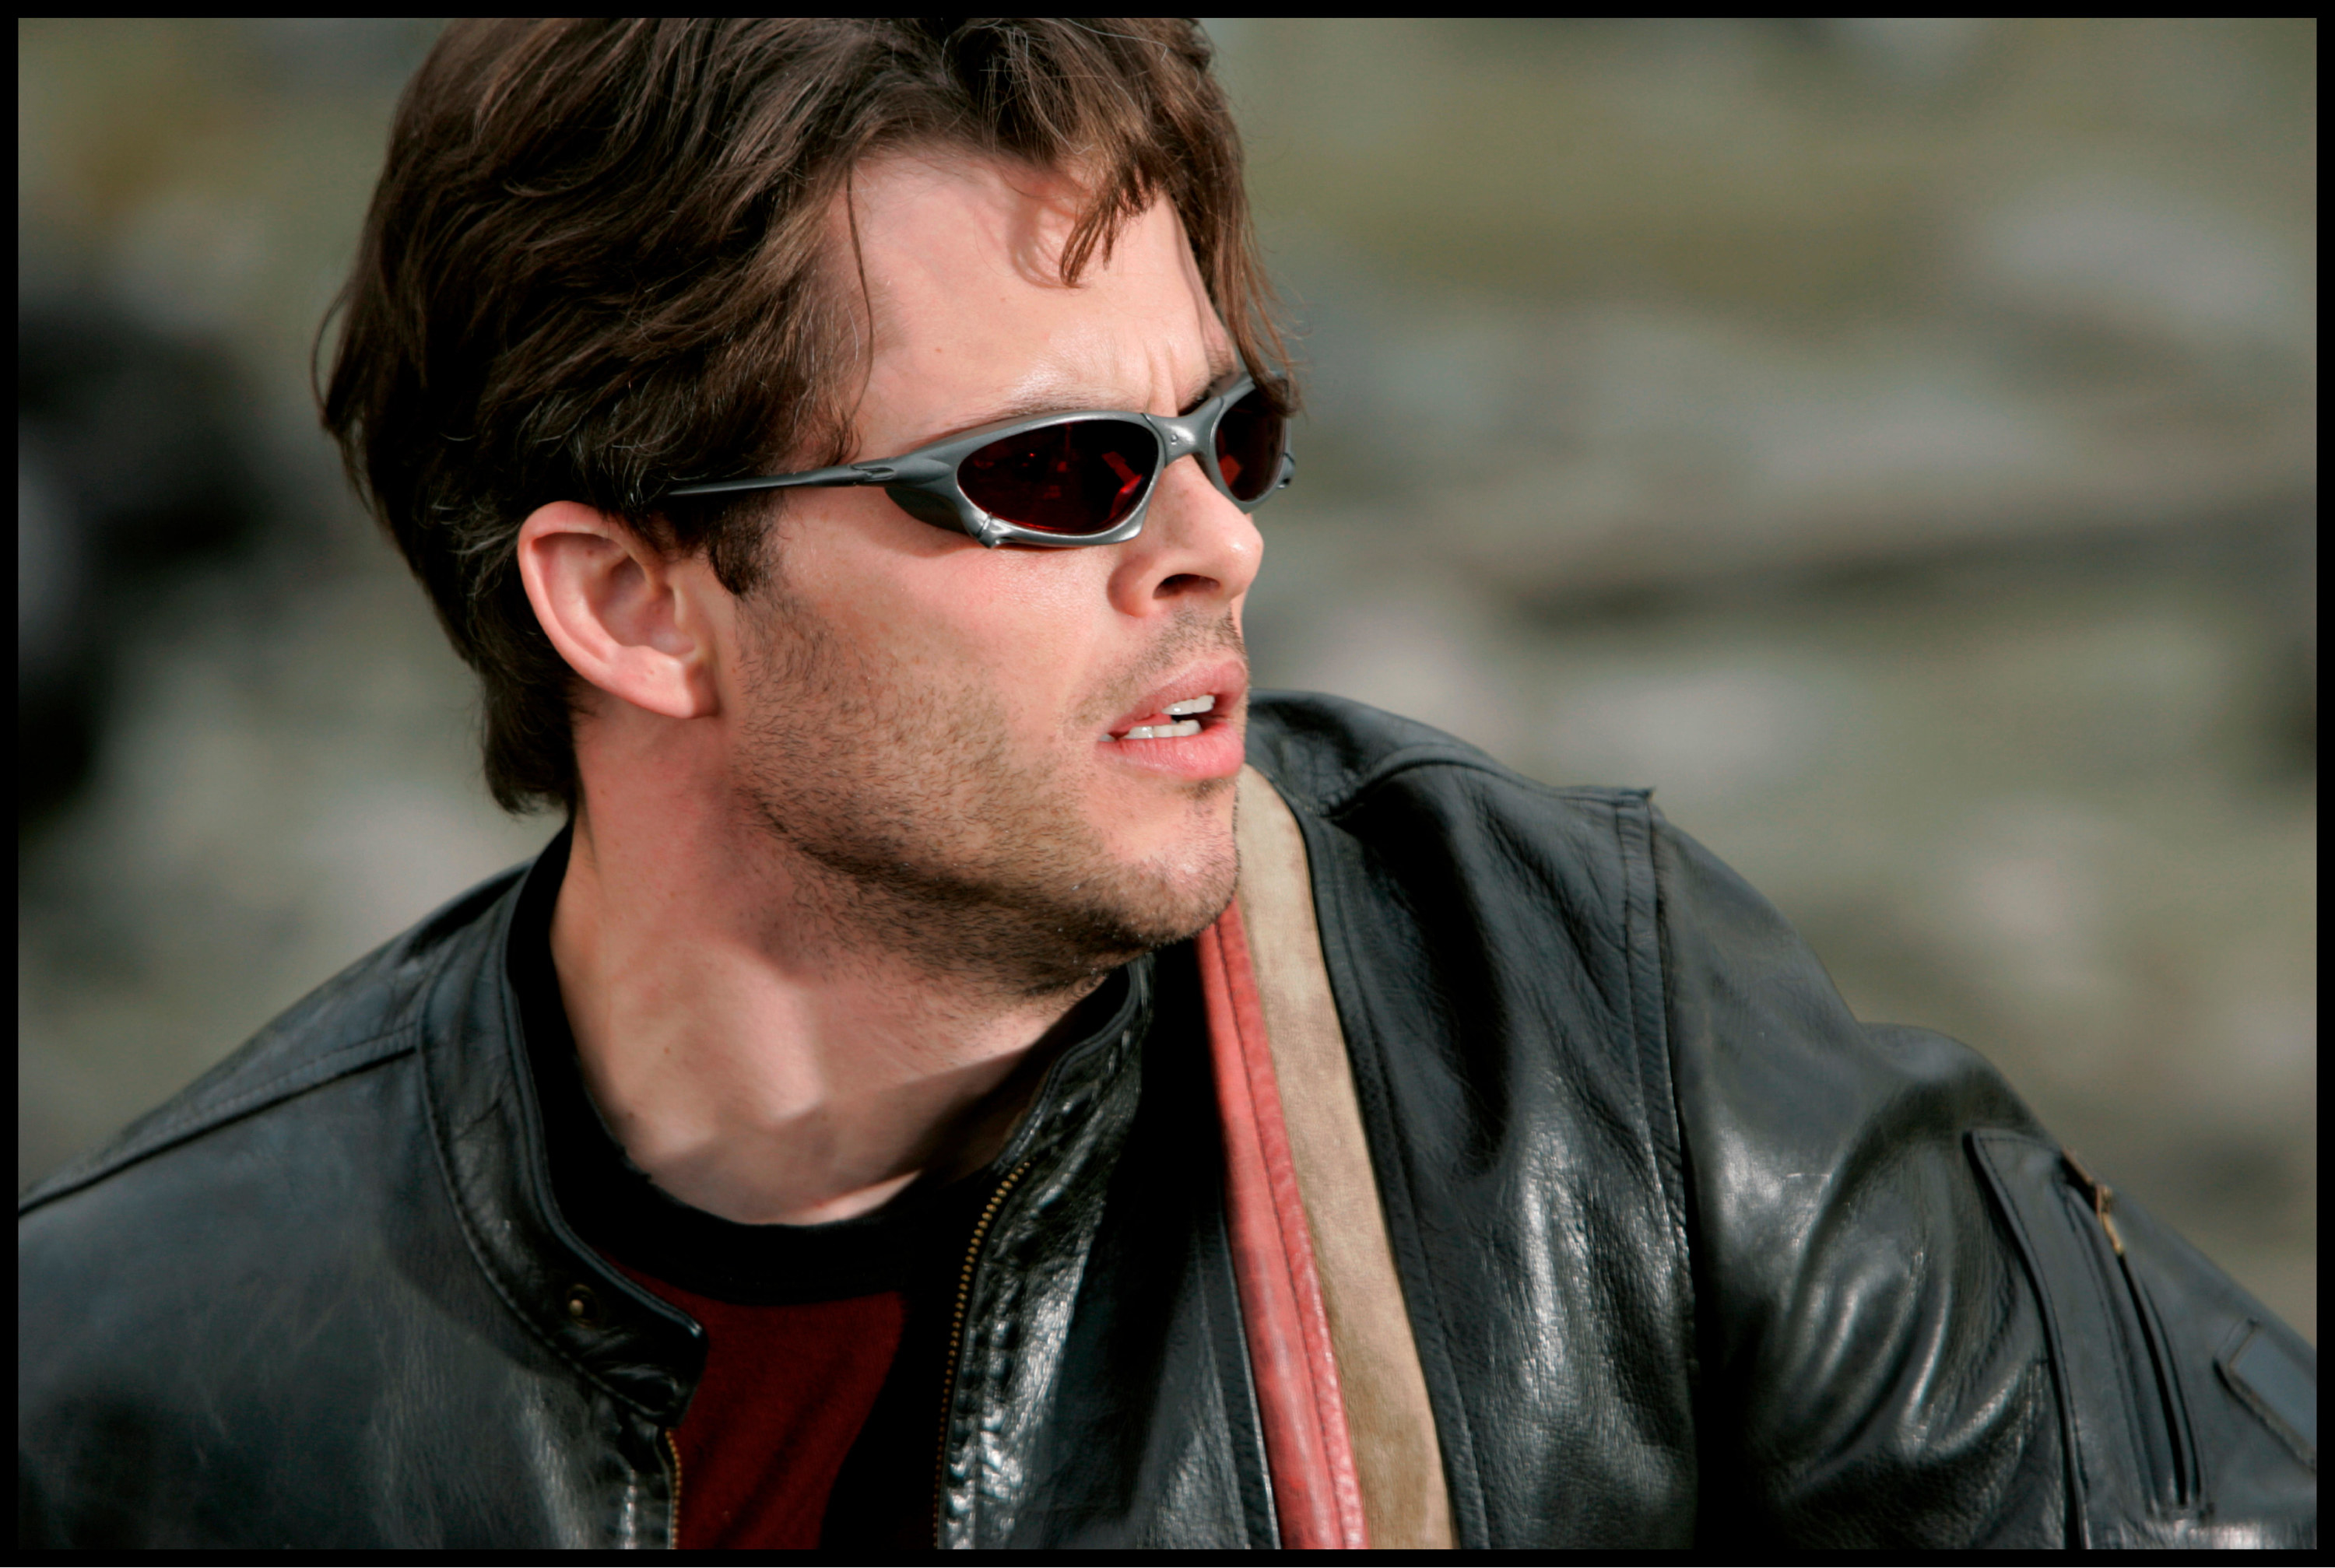 A man in sunglasses and a leather jacket stares with concern into the distance